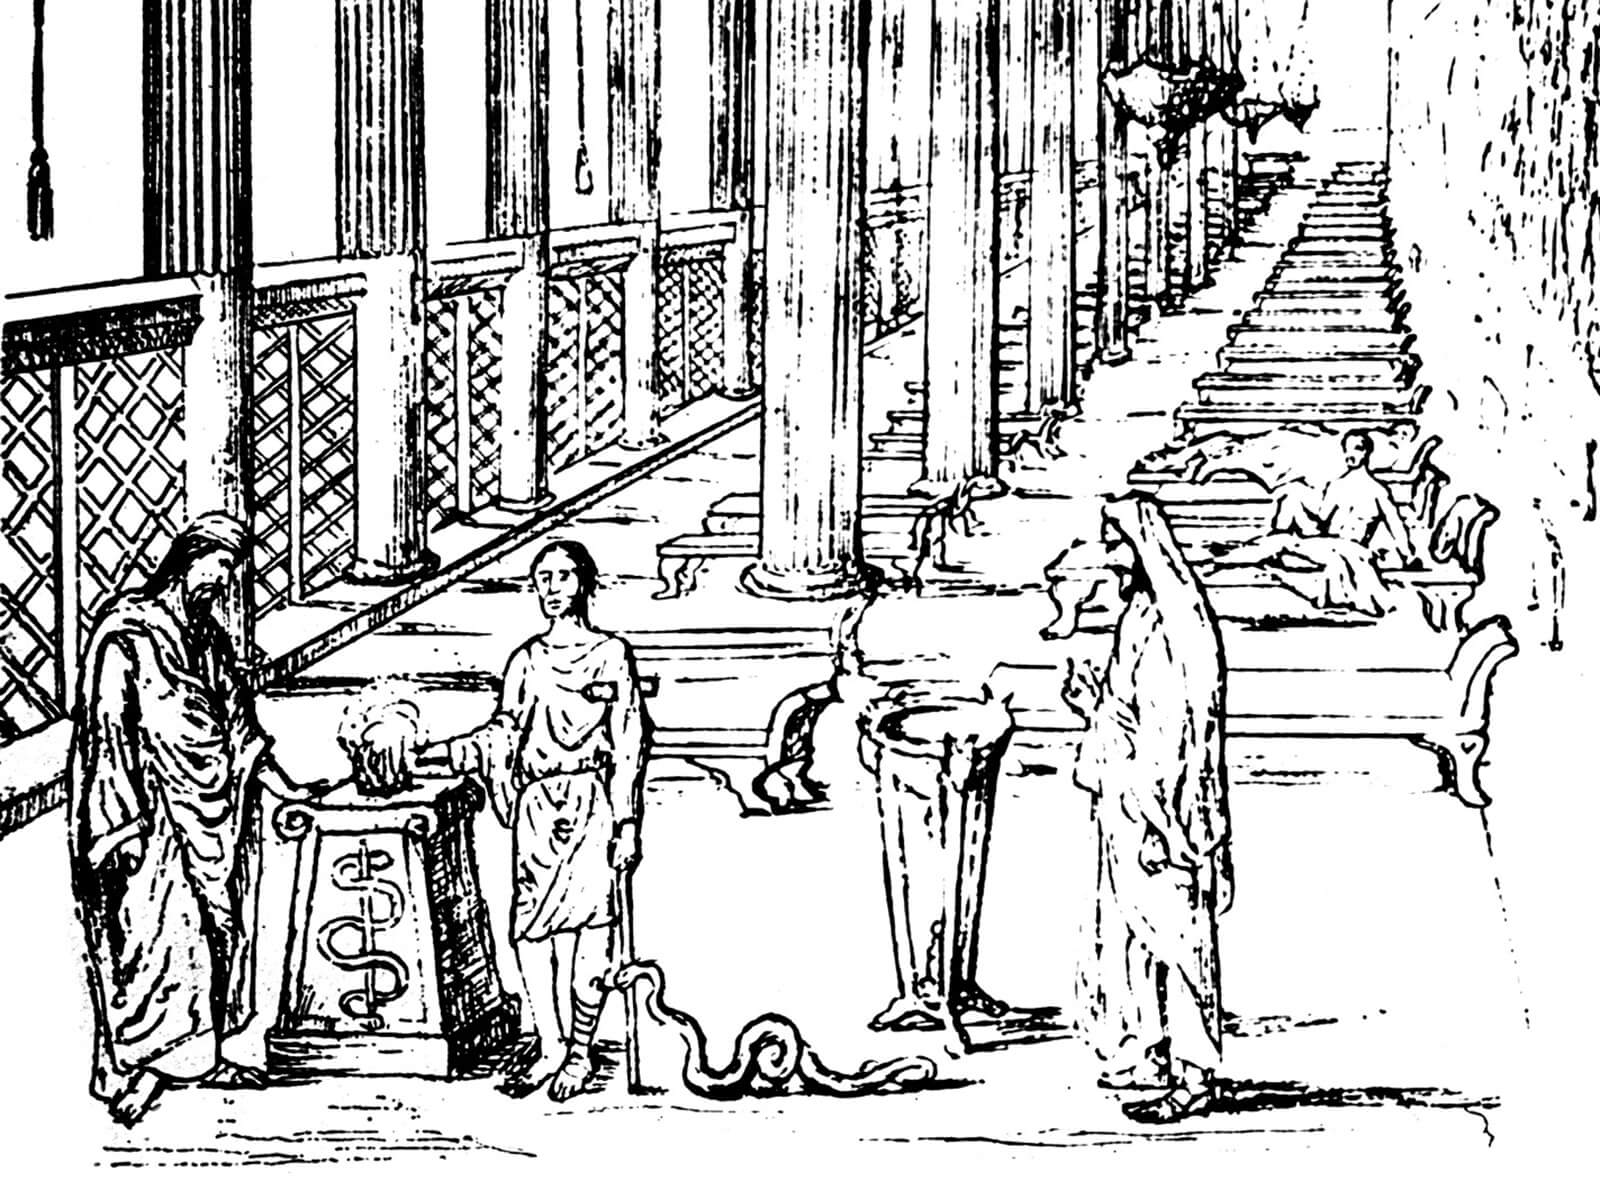 Imagining the interior of the abaton at Epidauros. In this illustration, a patient is shown making a sacrifice while his injured leg is licked by the sacred serpent. Illustration from Richard Caton, The Temples and Ritual of Asklepios at Epidauros and Athens, 1900.